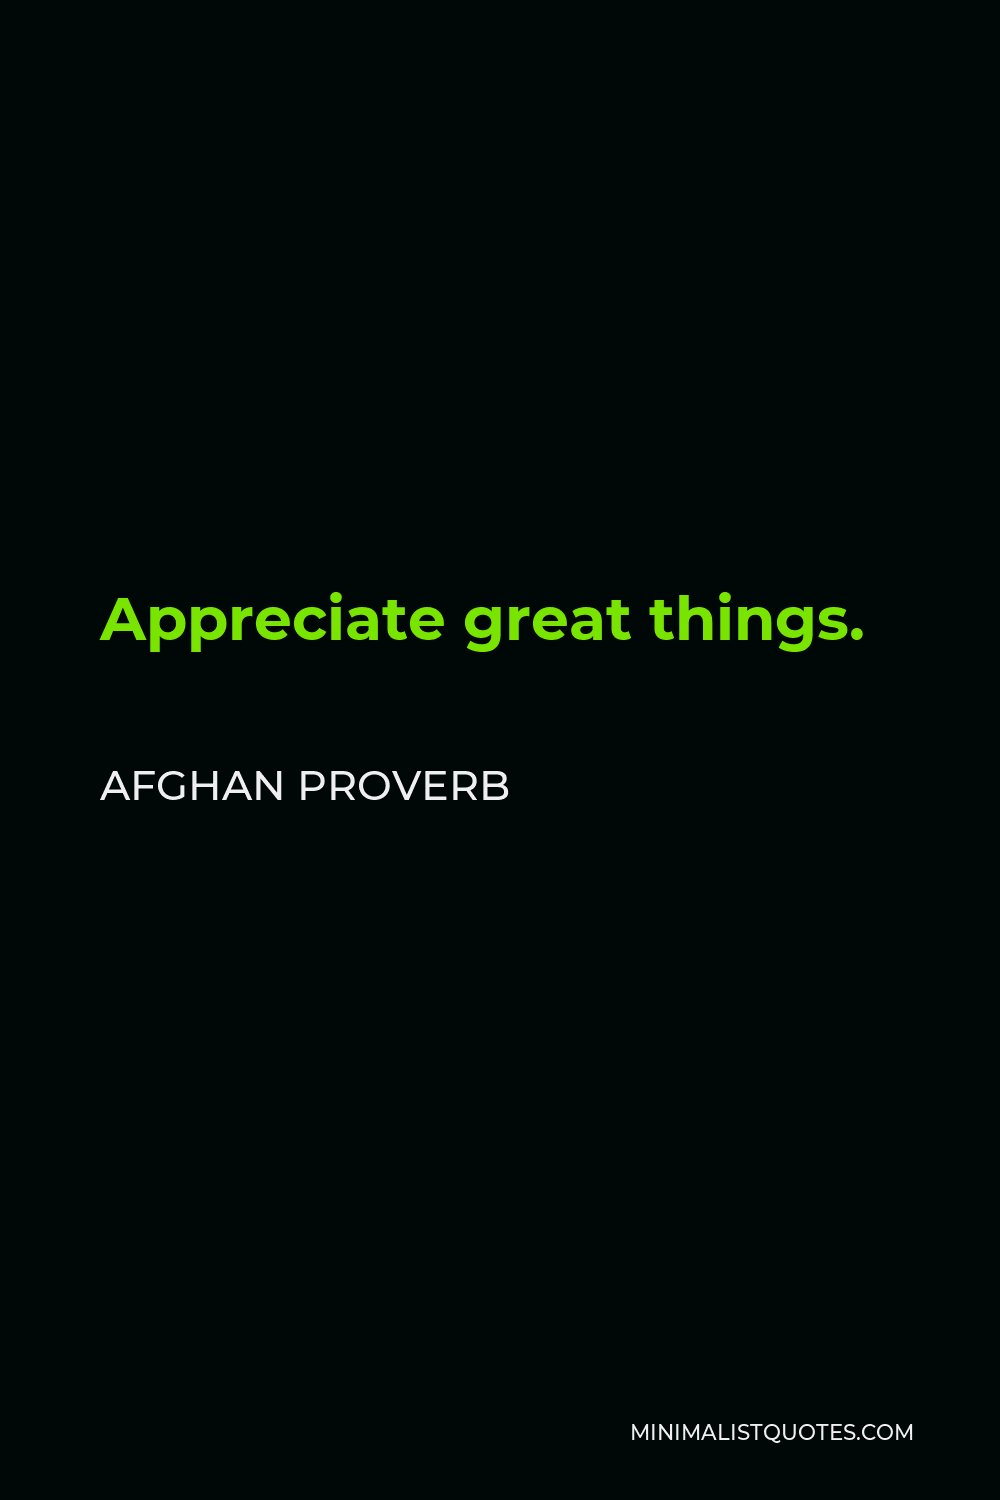 Afghan Proverb Quote - Appreciate great things.